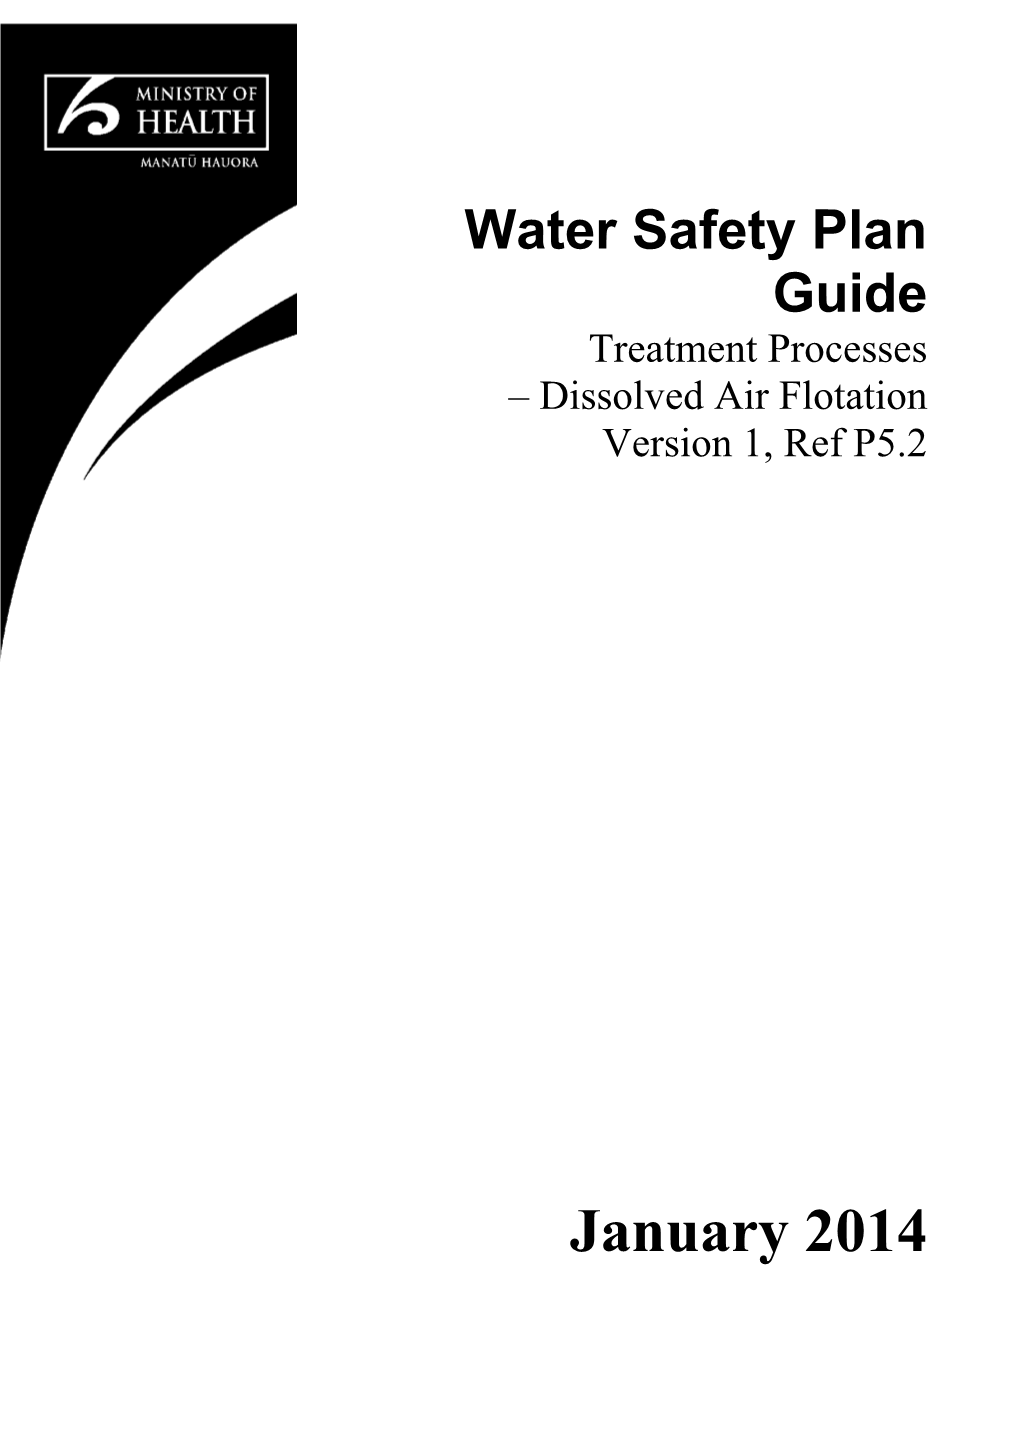 Water Safety Plan Guide: Treatment Processes Dissolved Air Flotation